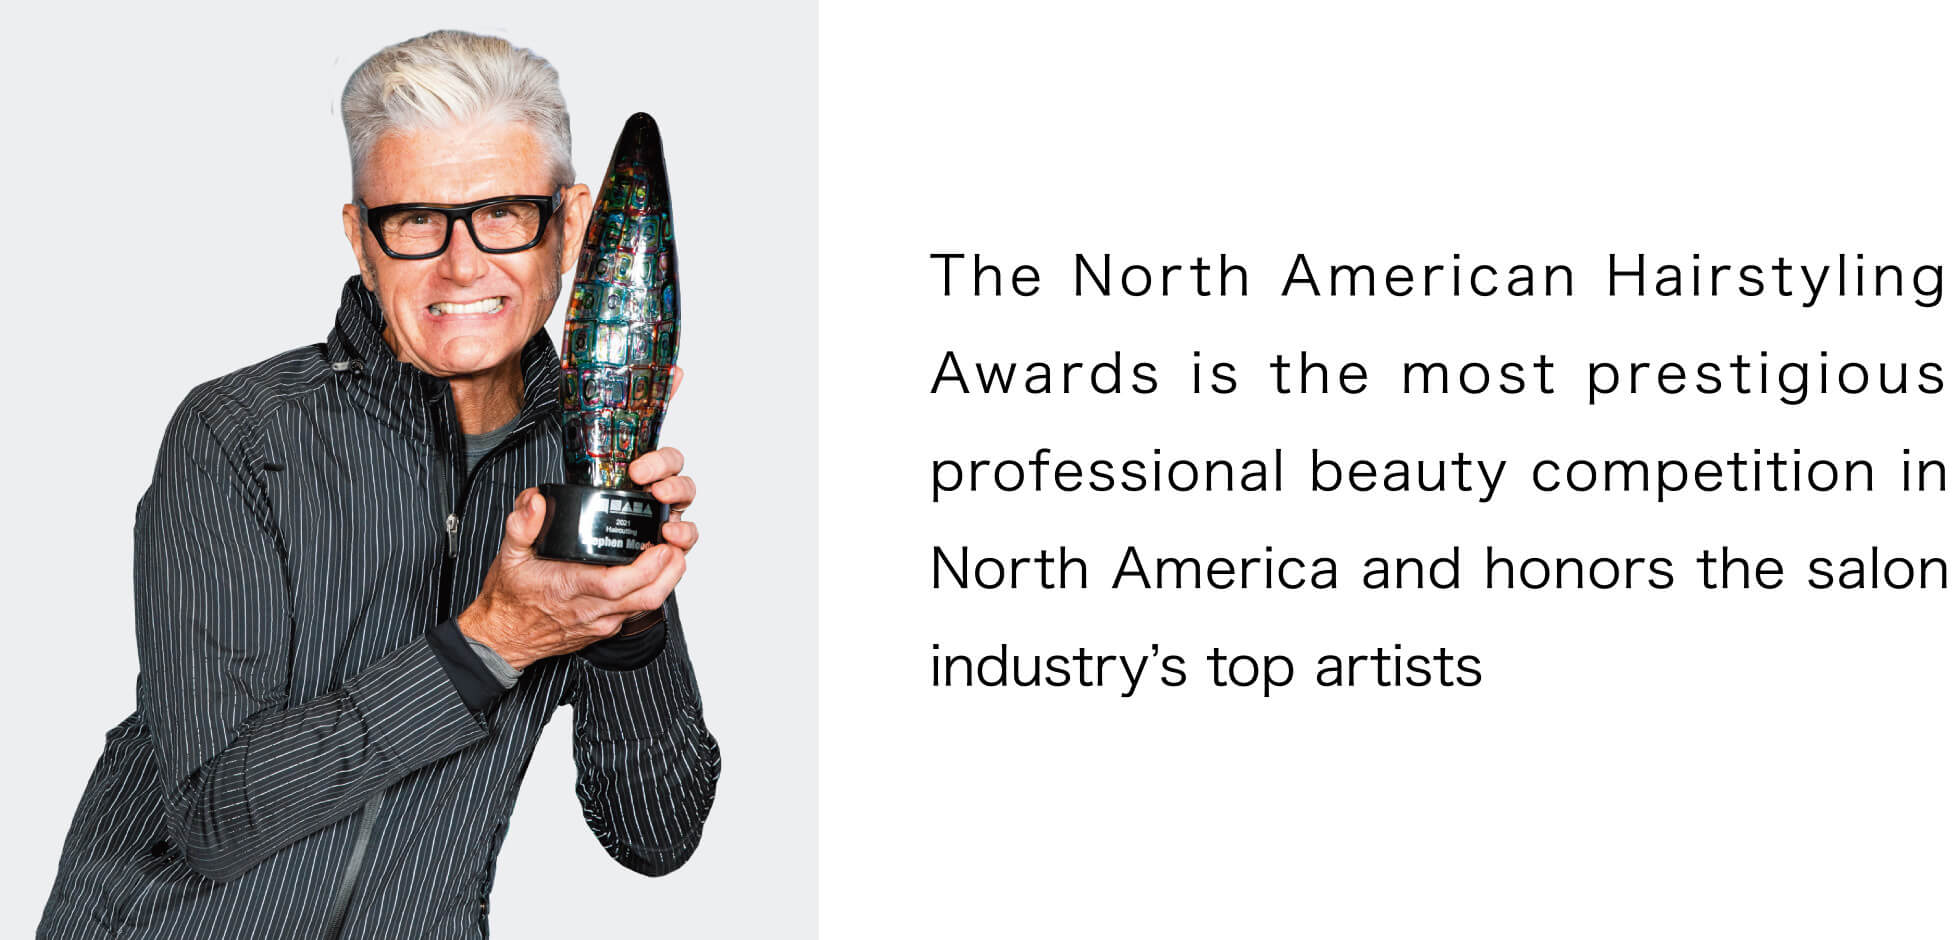 NORTH AMERICAN HAIRSTYLING AWARDS